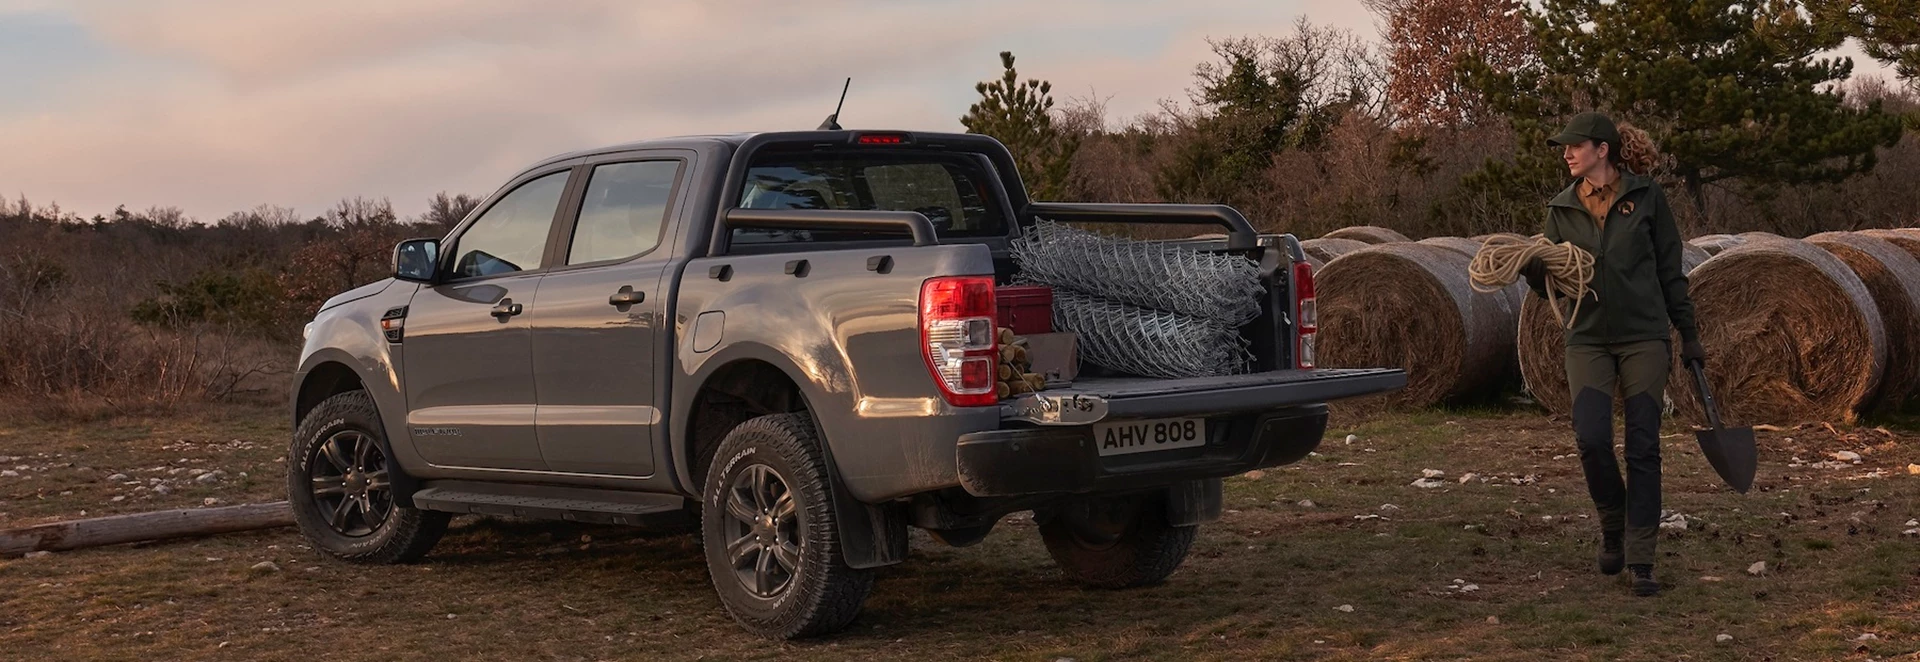 Ford launches two new special-edition Ranger pick-ups 